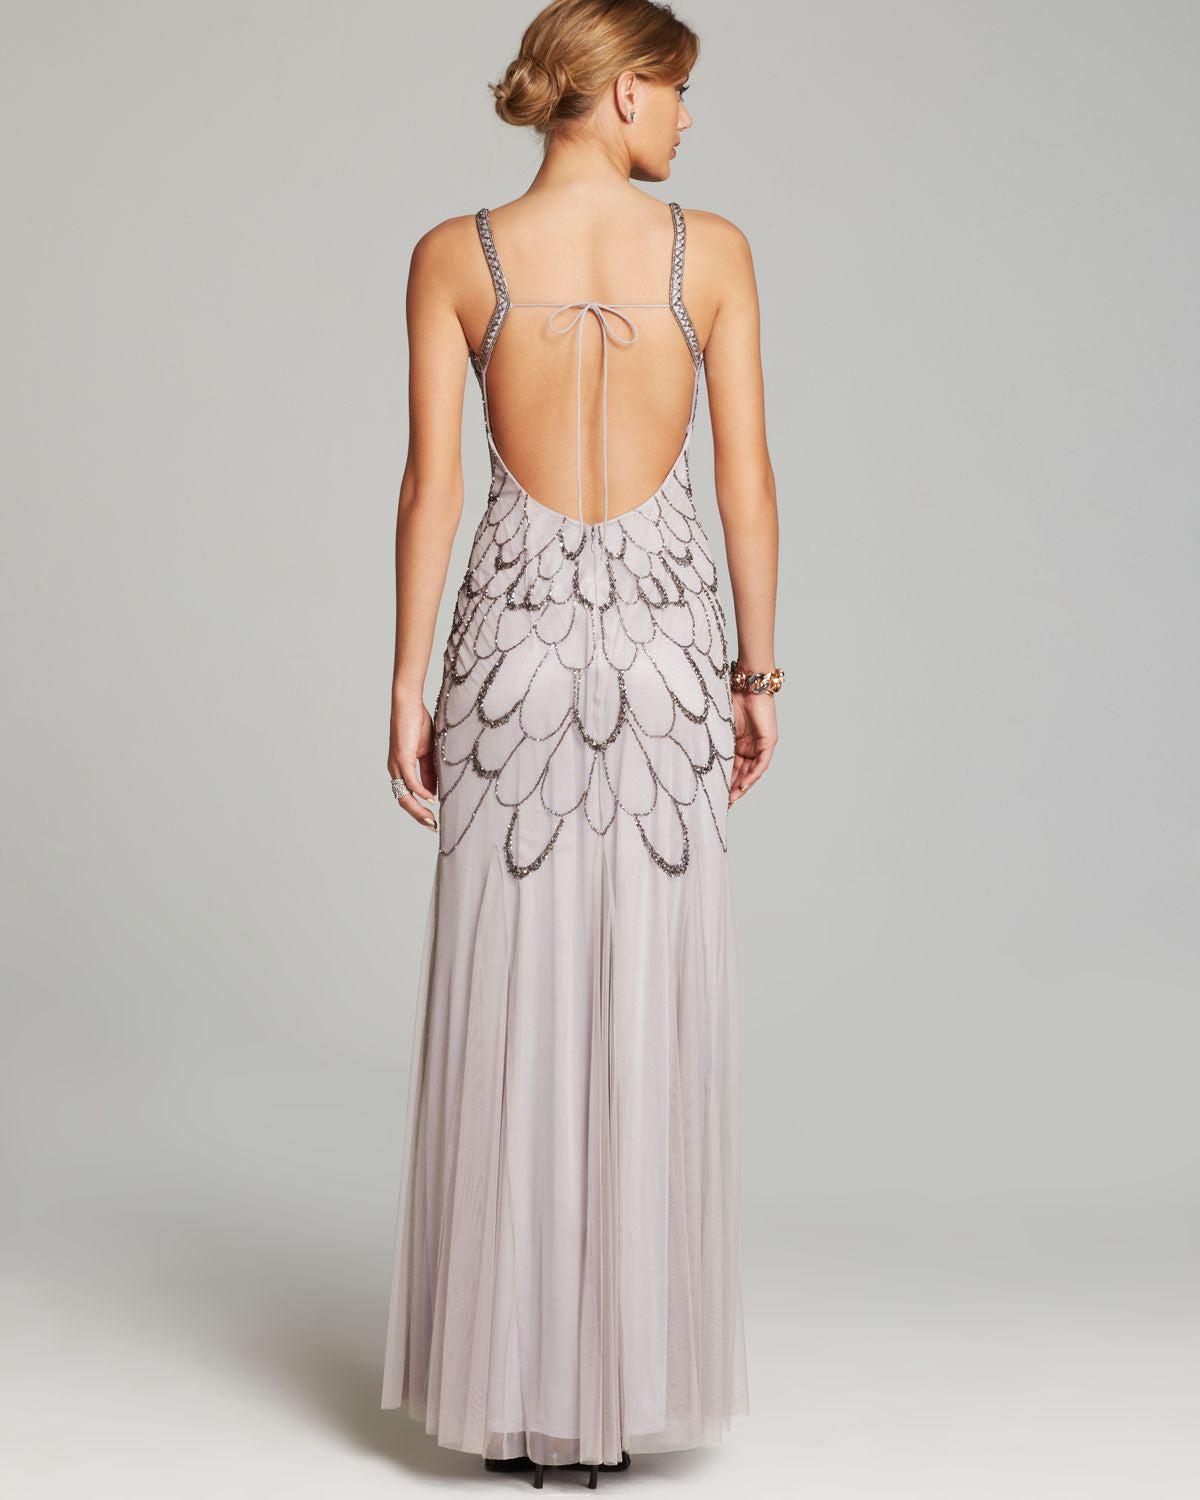 Adrianna Papell Beaded Backless Mesh Art Deco Gown - Heather Grey